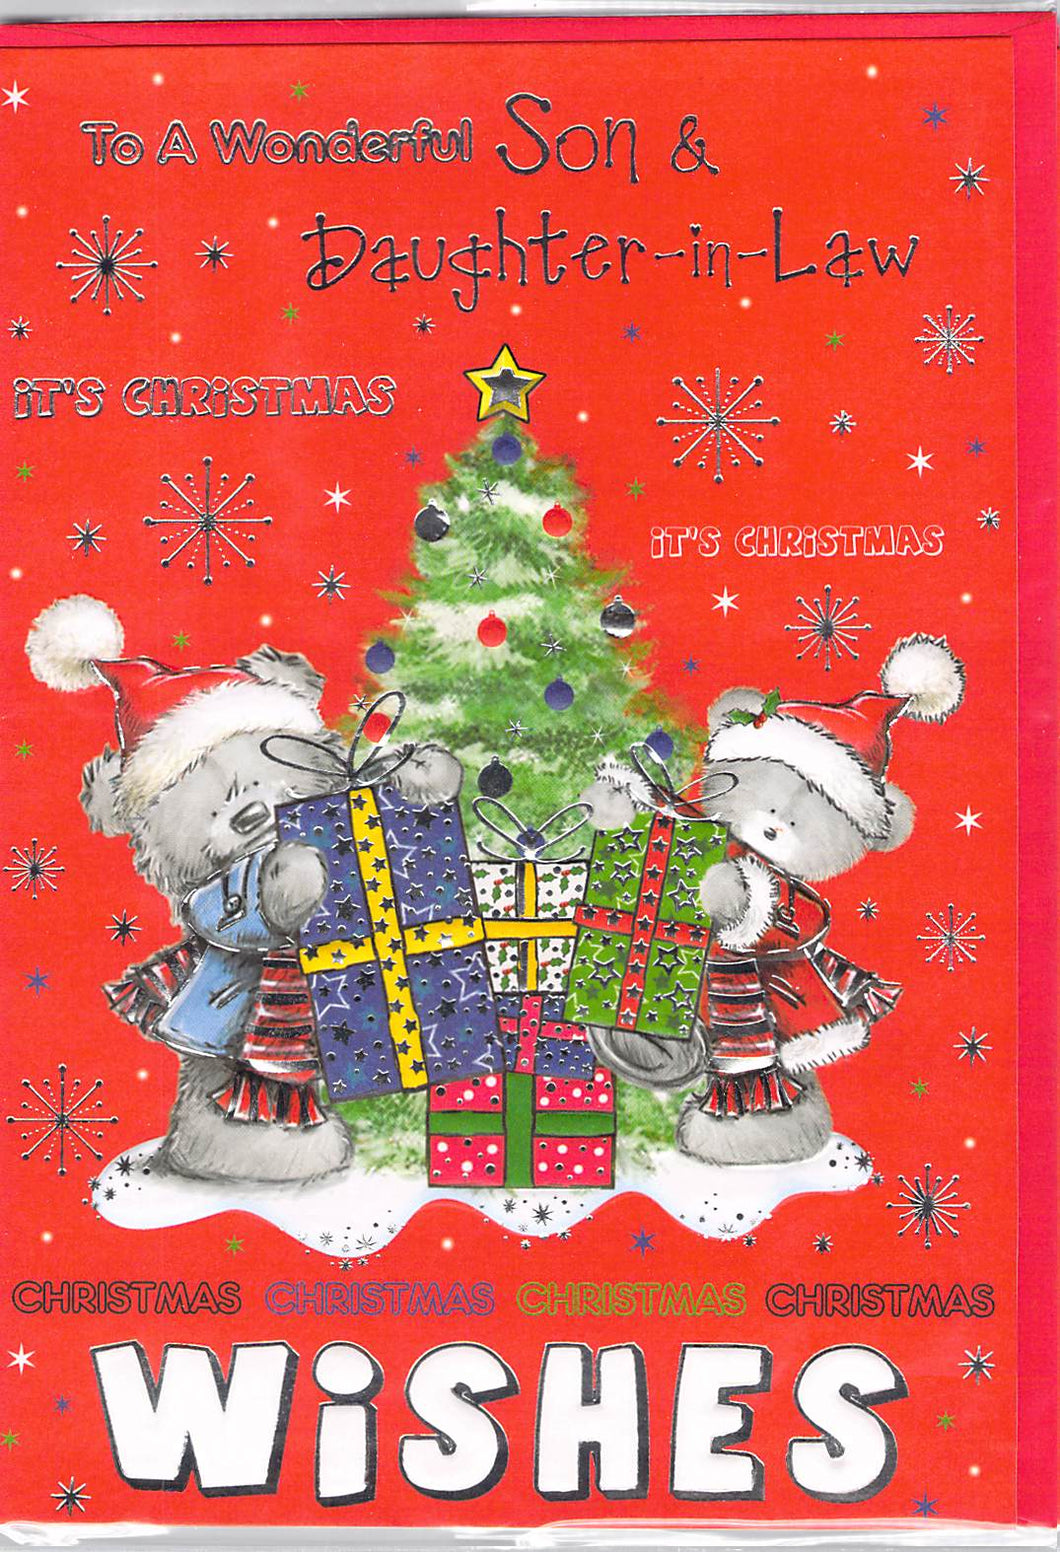 Christmas - Son & Daughter In Law - Greeting Card - Multi Buy Discount